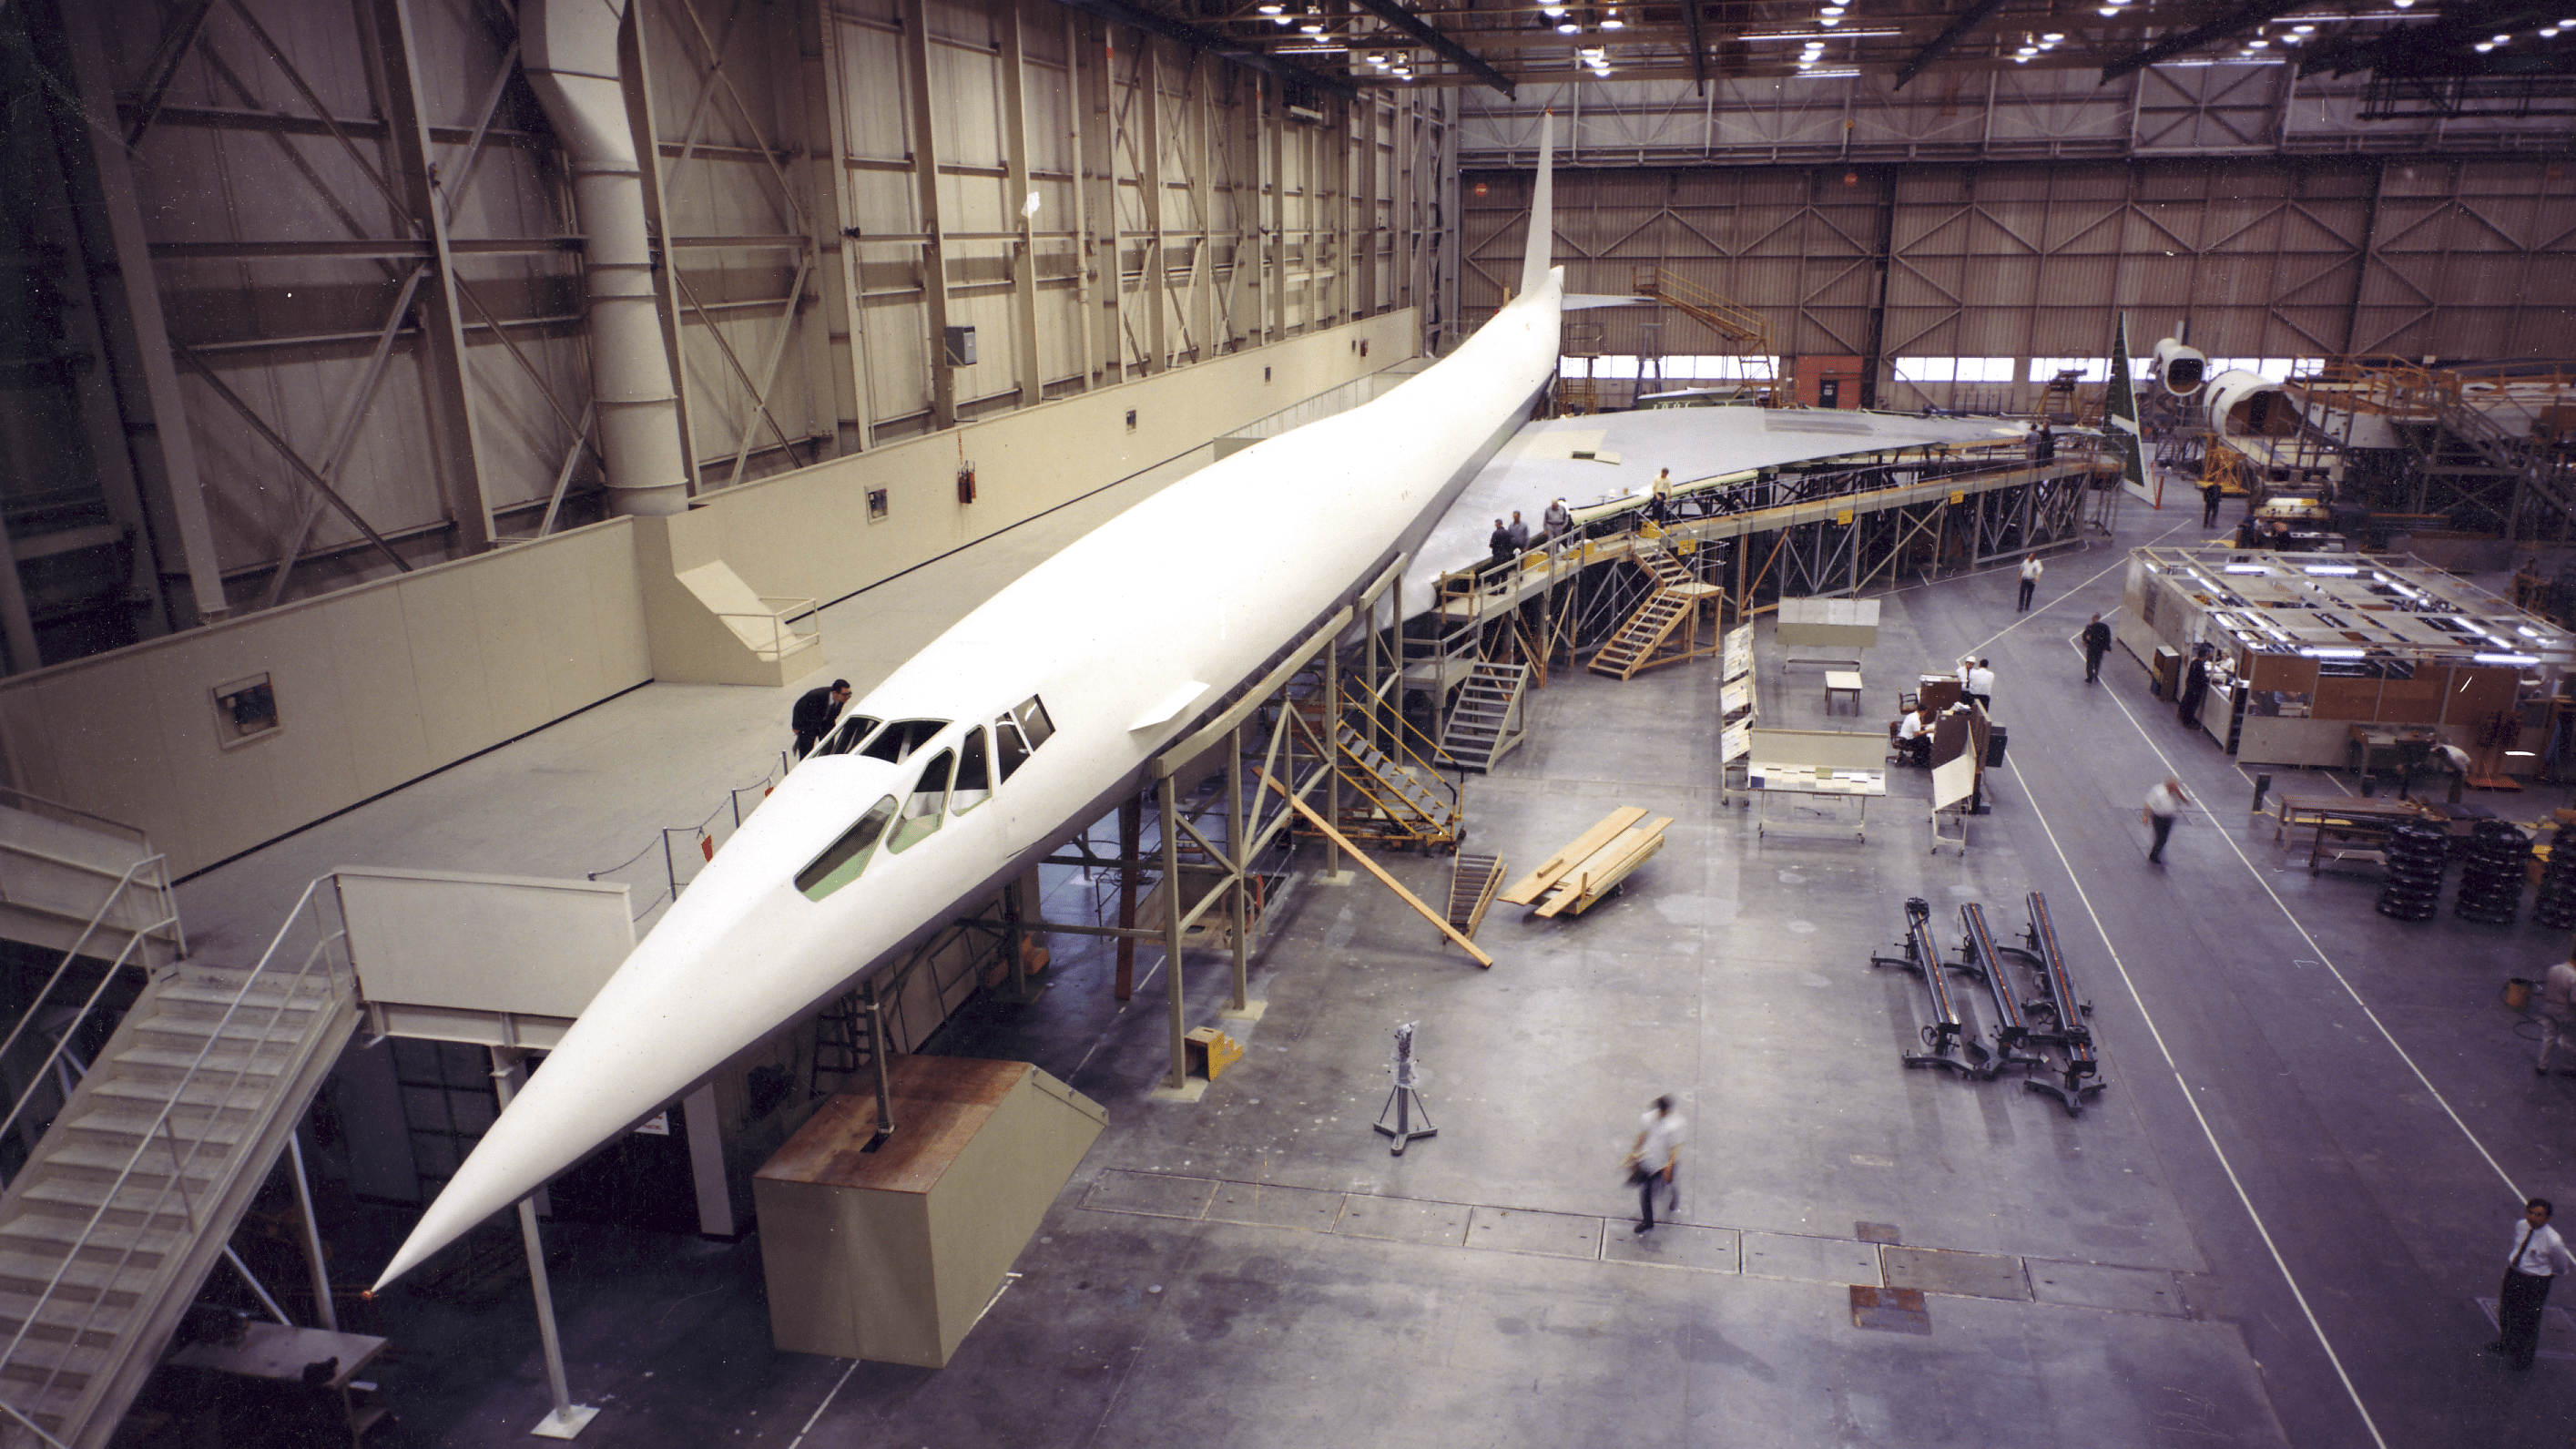 An incomplete Boeing 2707 in a hangar.